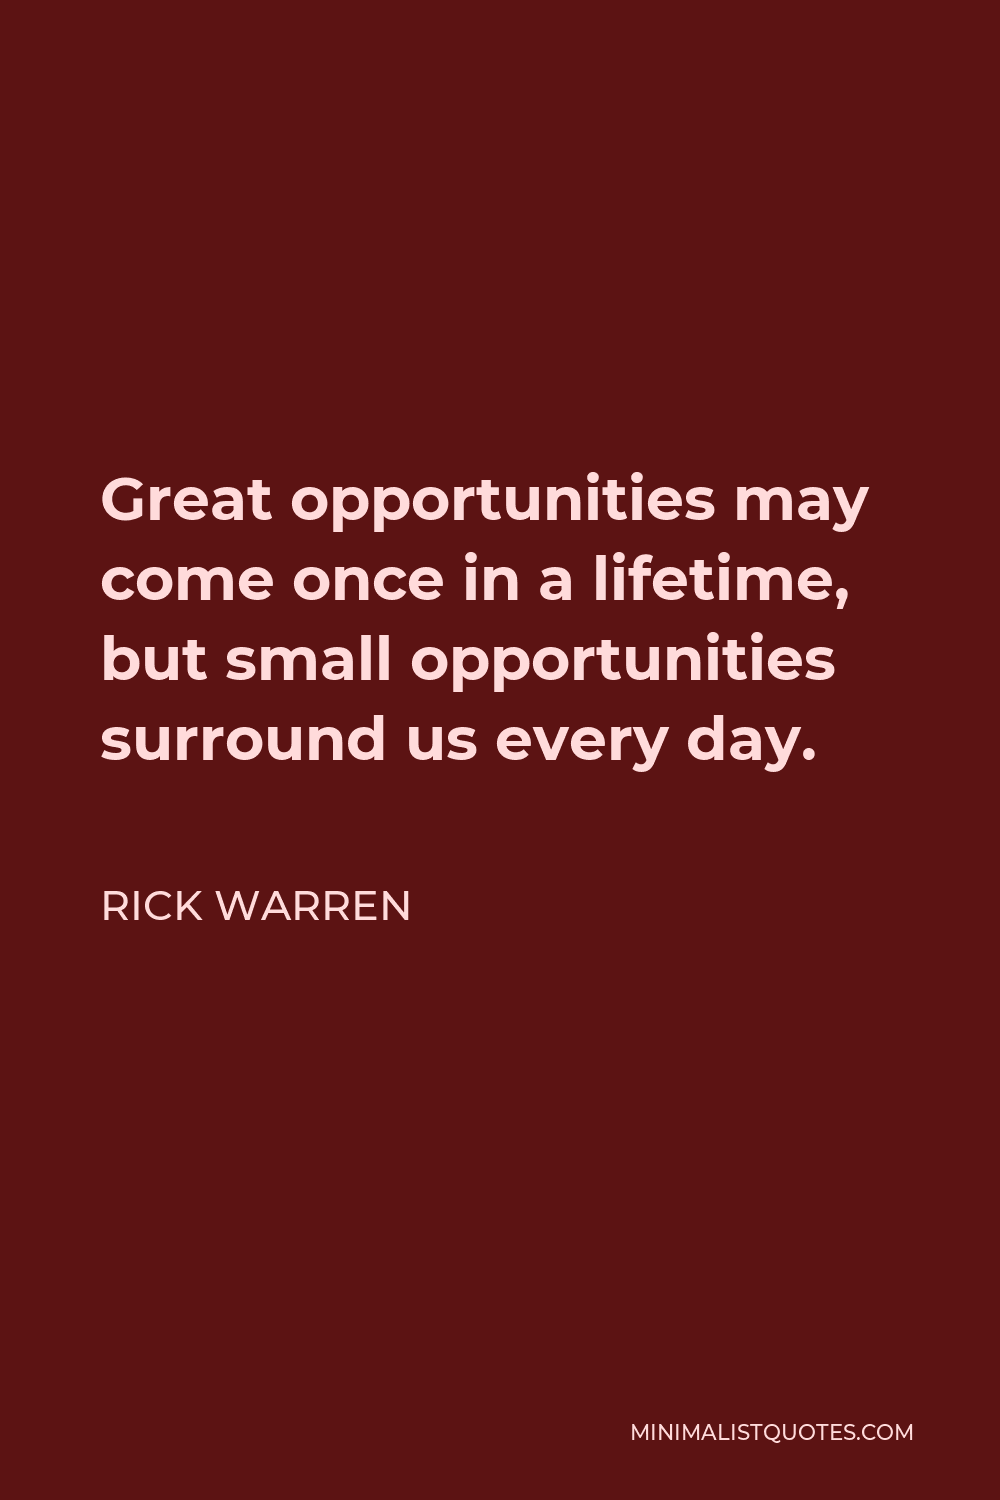 Rick Warren Quote - Great opportunities may come once in a lifetime, but small opportunities surround us every day.